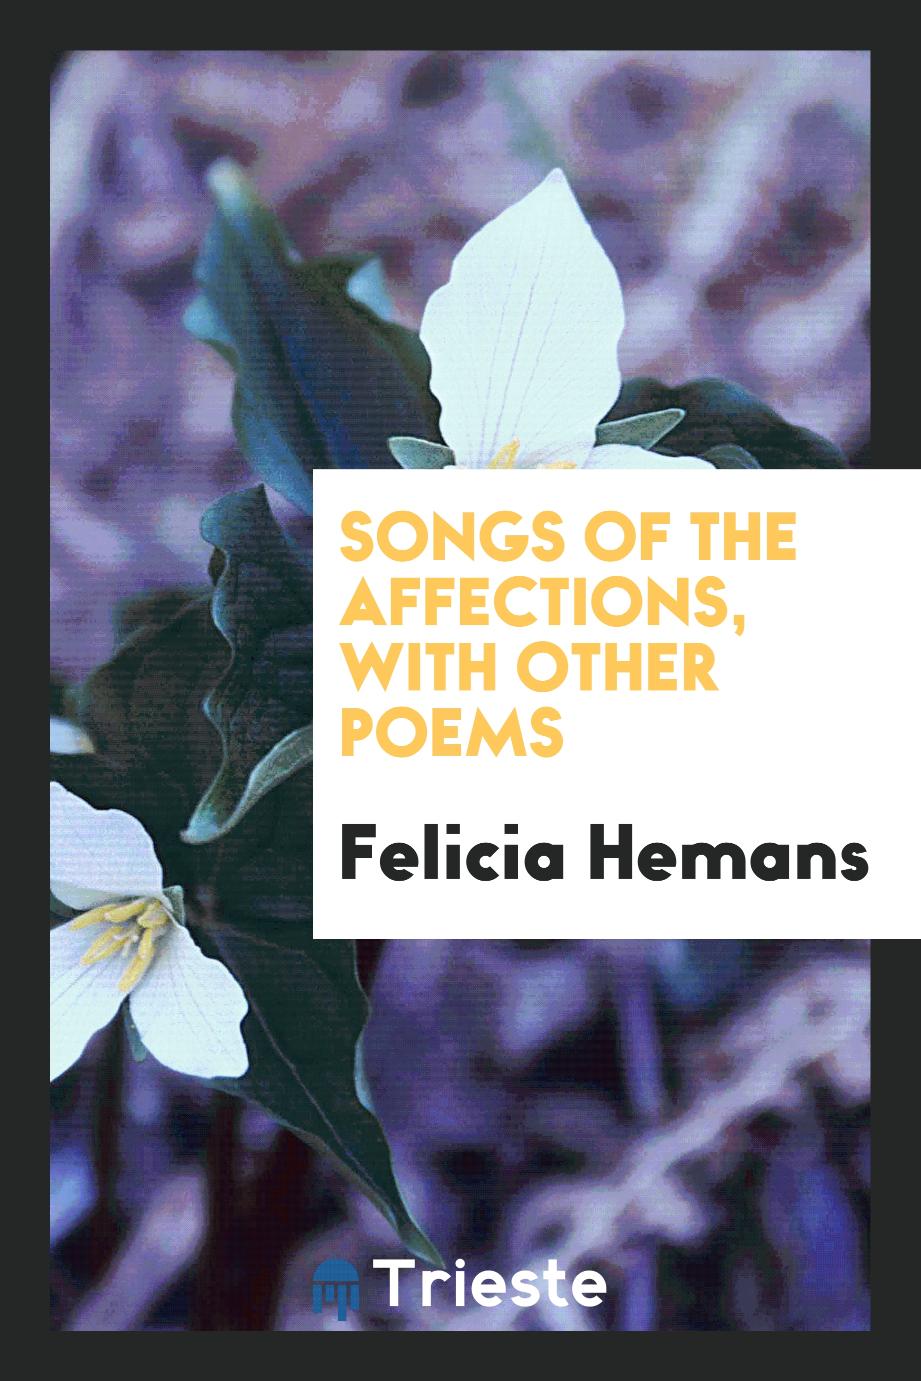 Songs of the affections, with other poems